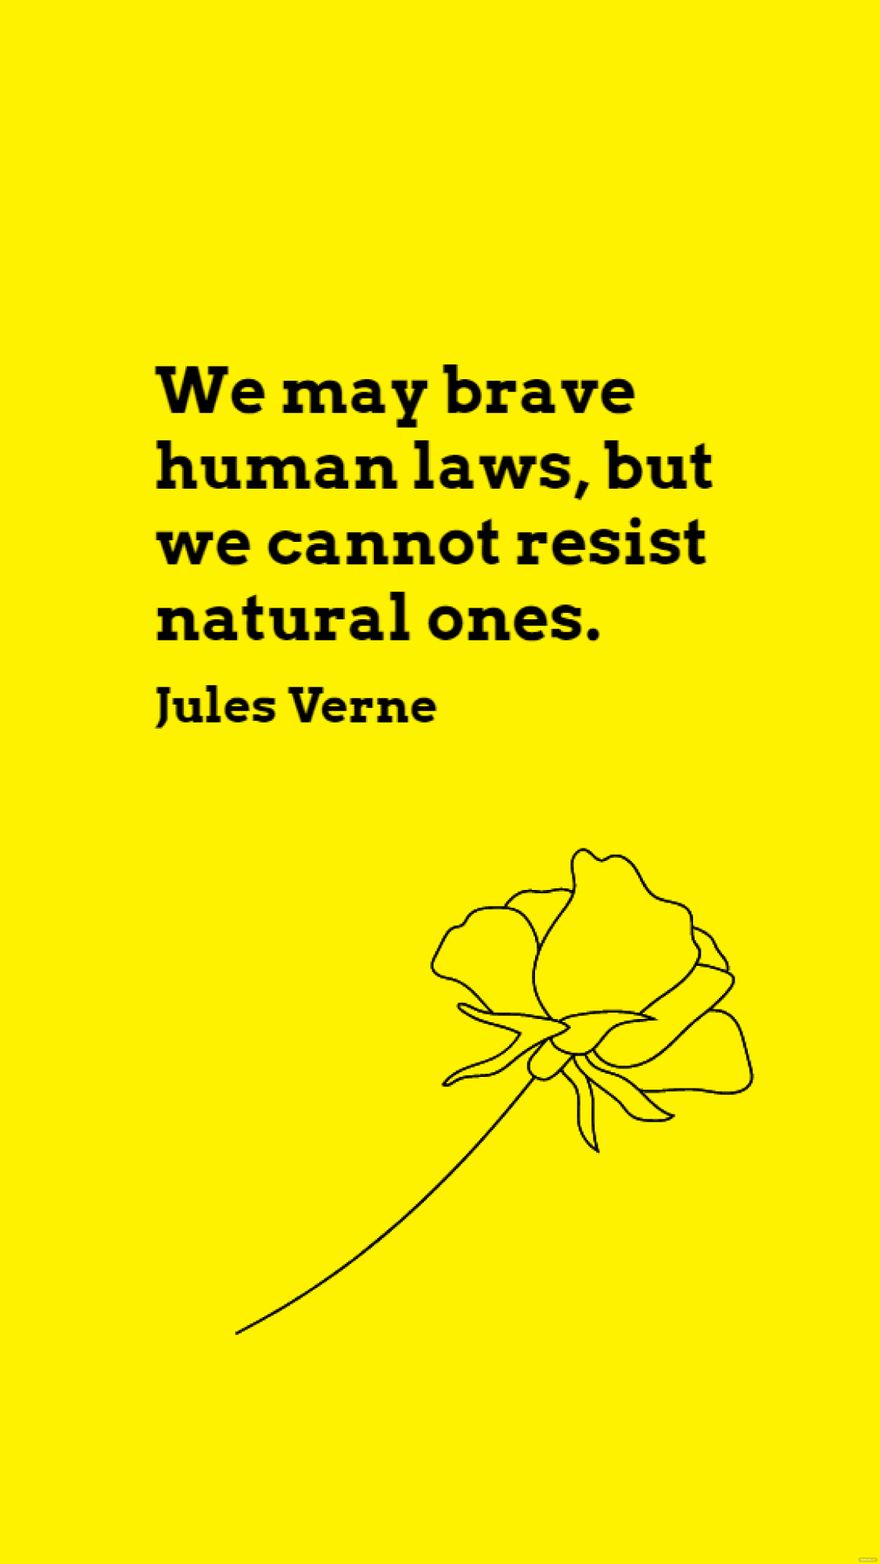 Free Jules Verne - We may brave human laws, but we cannot resist natural ones. in JPG